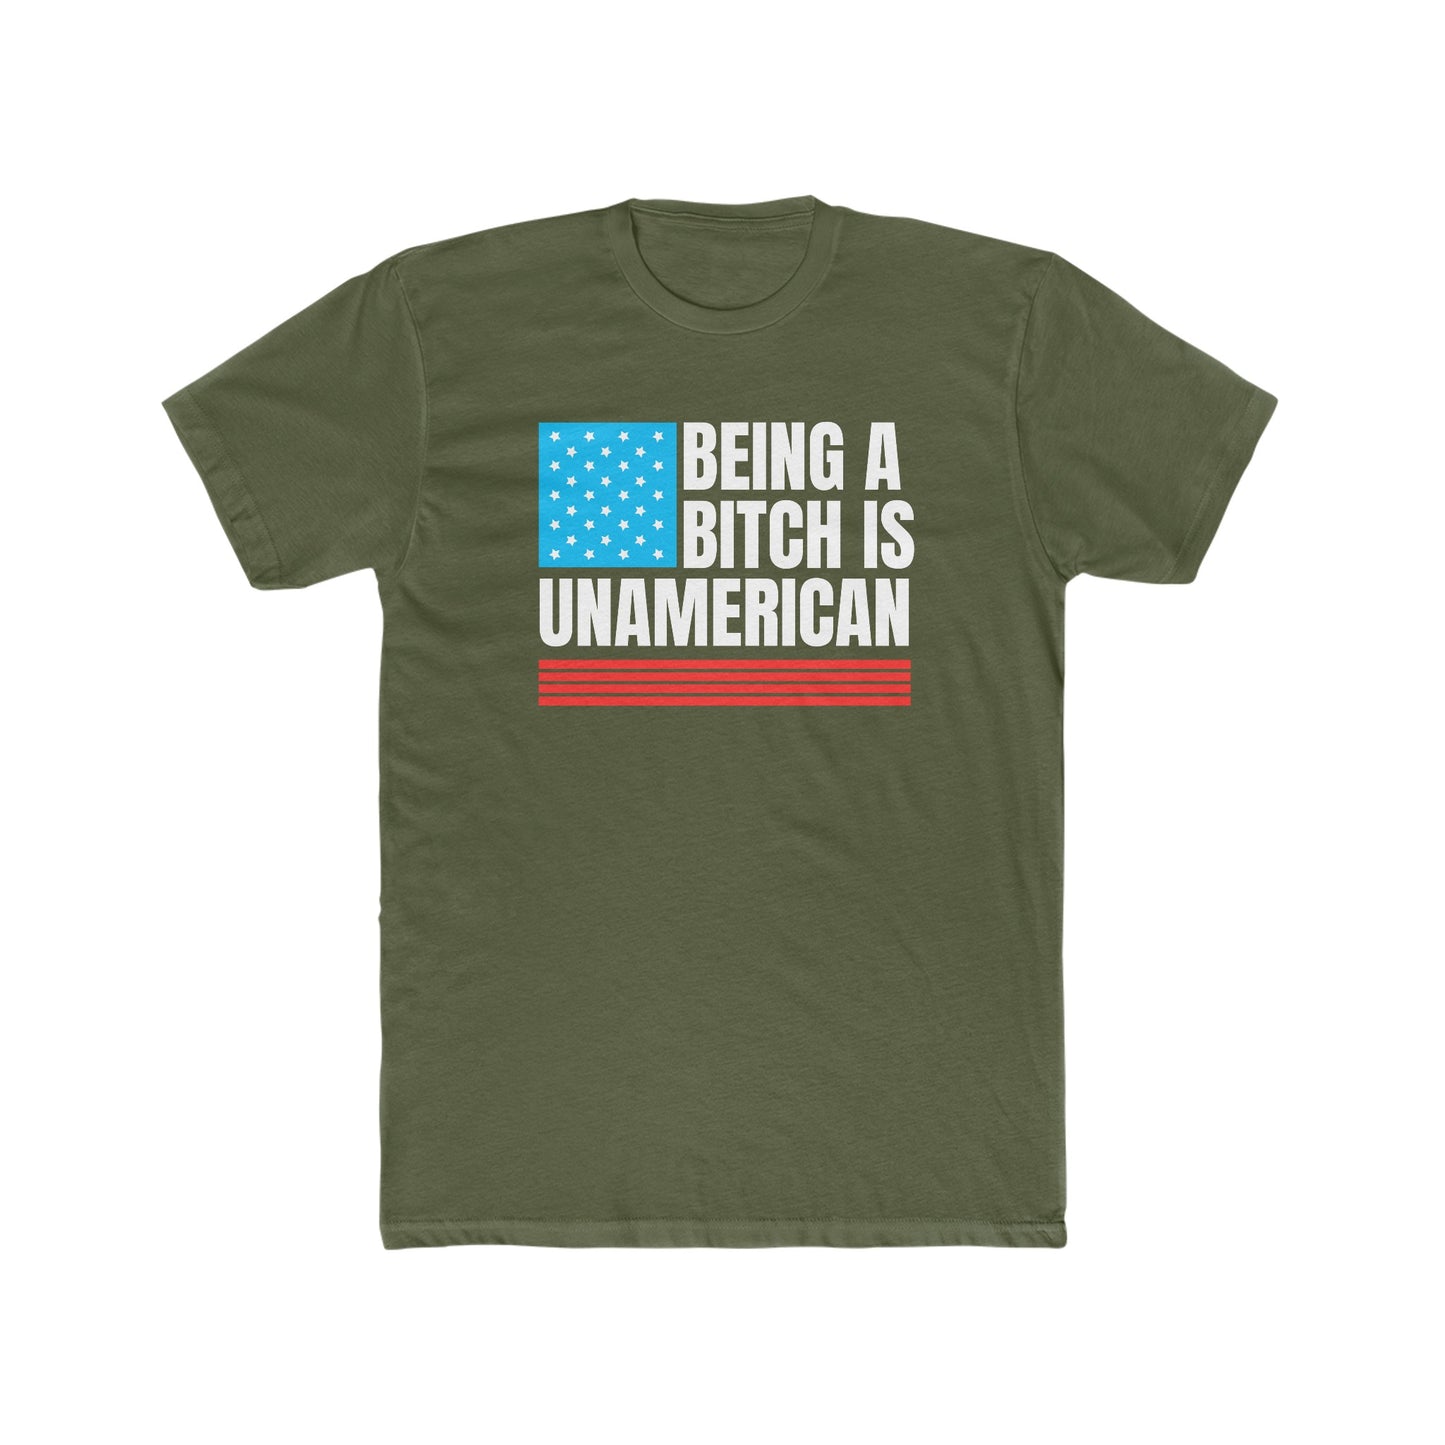 Being A Bitch Is Unamerican Tee